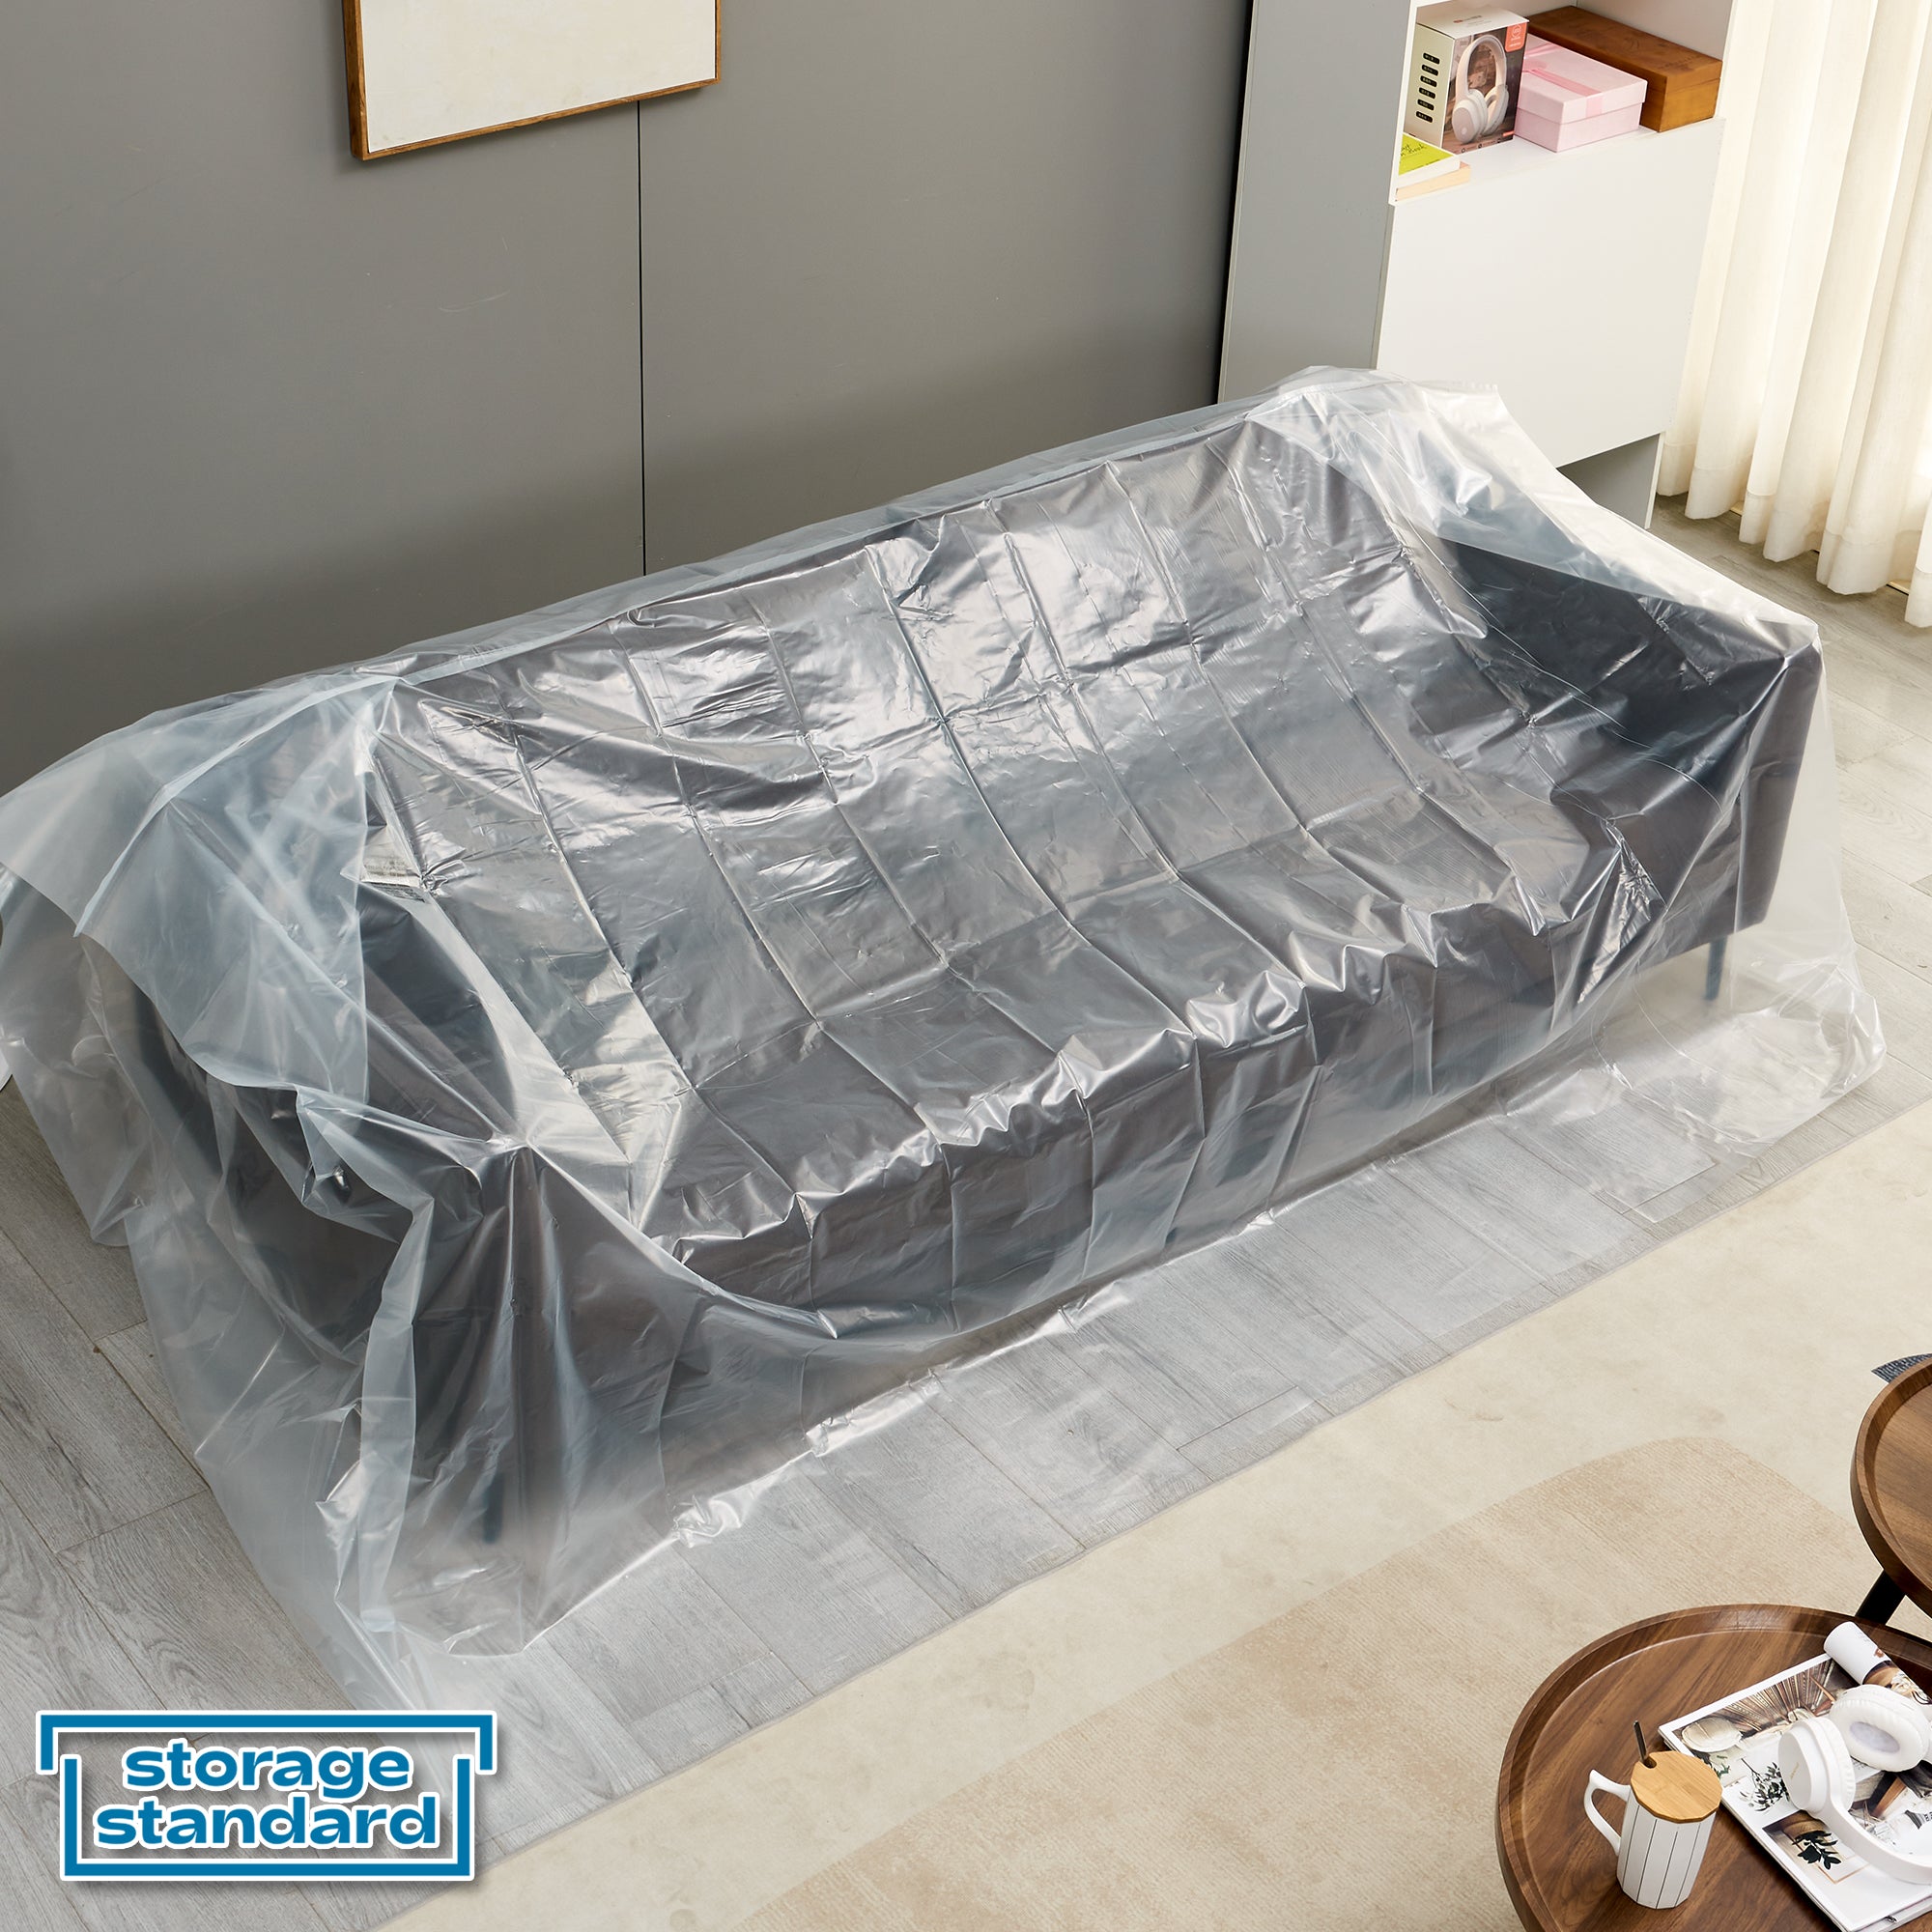 Plastic Furniture Covers for Moving - Heavy-Duty Plastic Couch Cover for Sofa, Waterproof & Dustproof Clear Moving Bags for Renovation, Wrap or Storage - Extra Large Bag Open Size 96 x 42 x 62 Inch